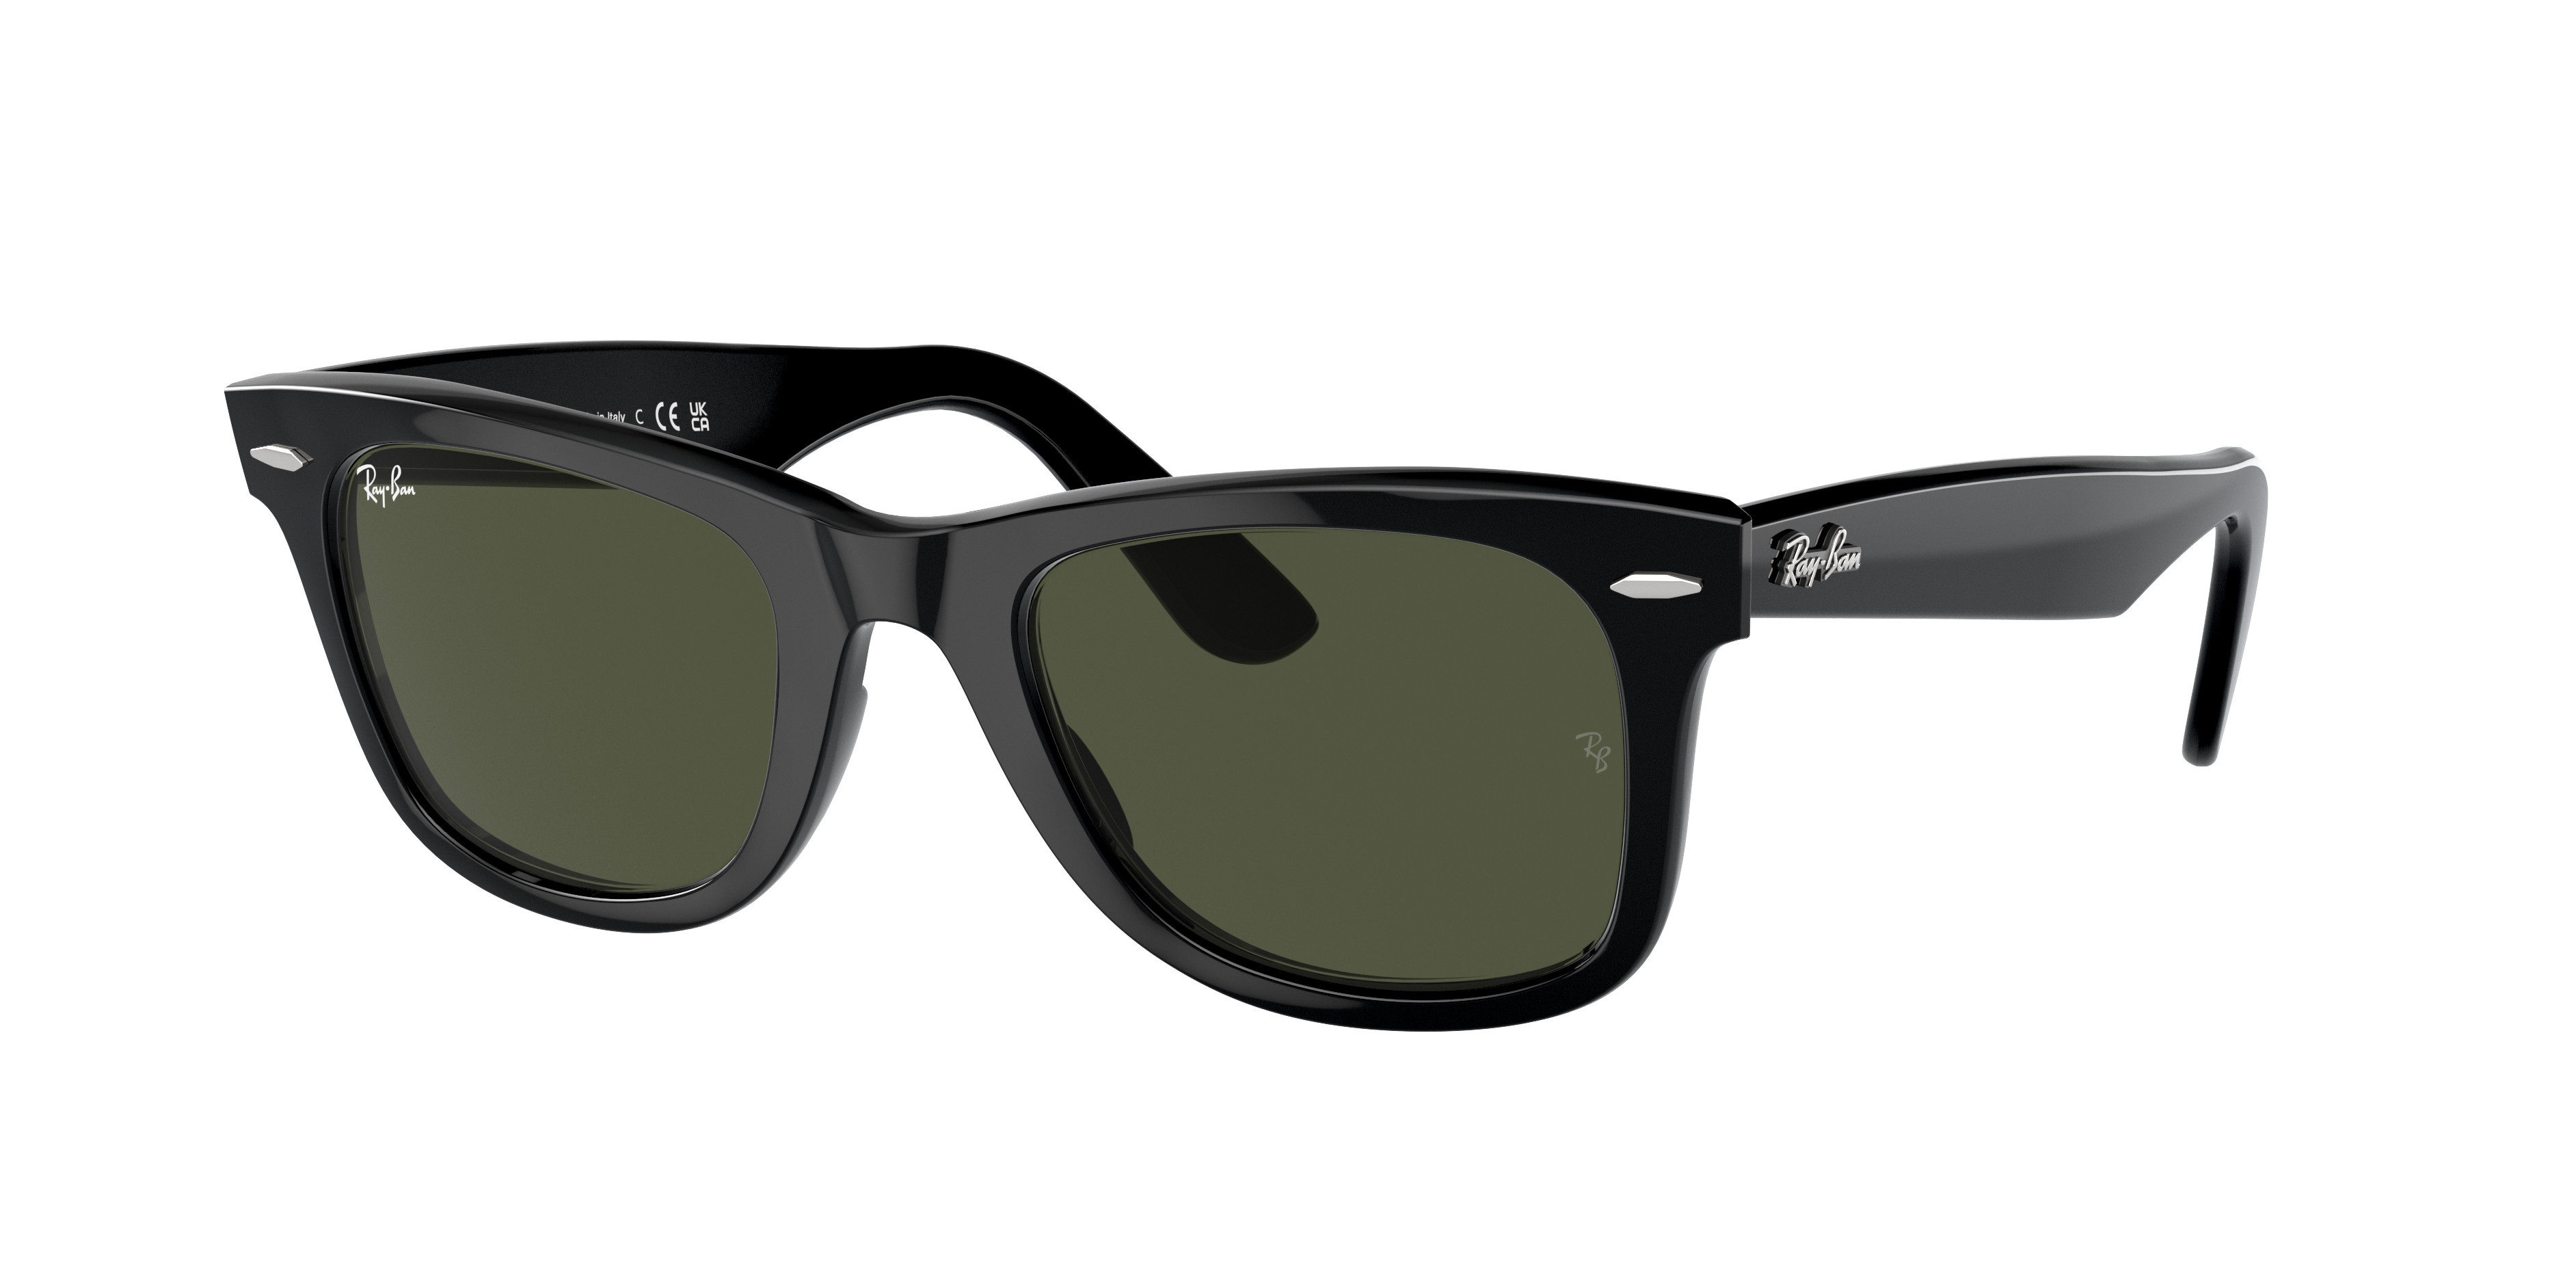 Outdated nephew Archeology Original Wayfarer Classic Sunglasses in Black and Green | Ray-Ban®